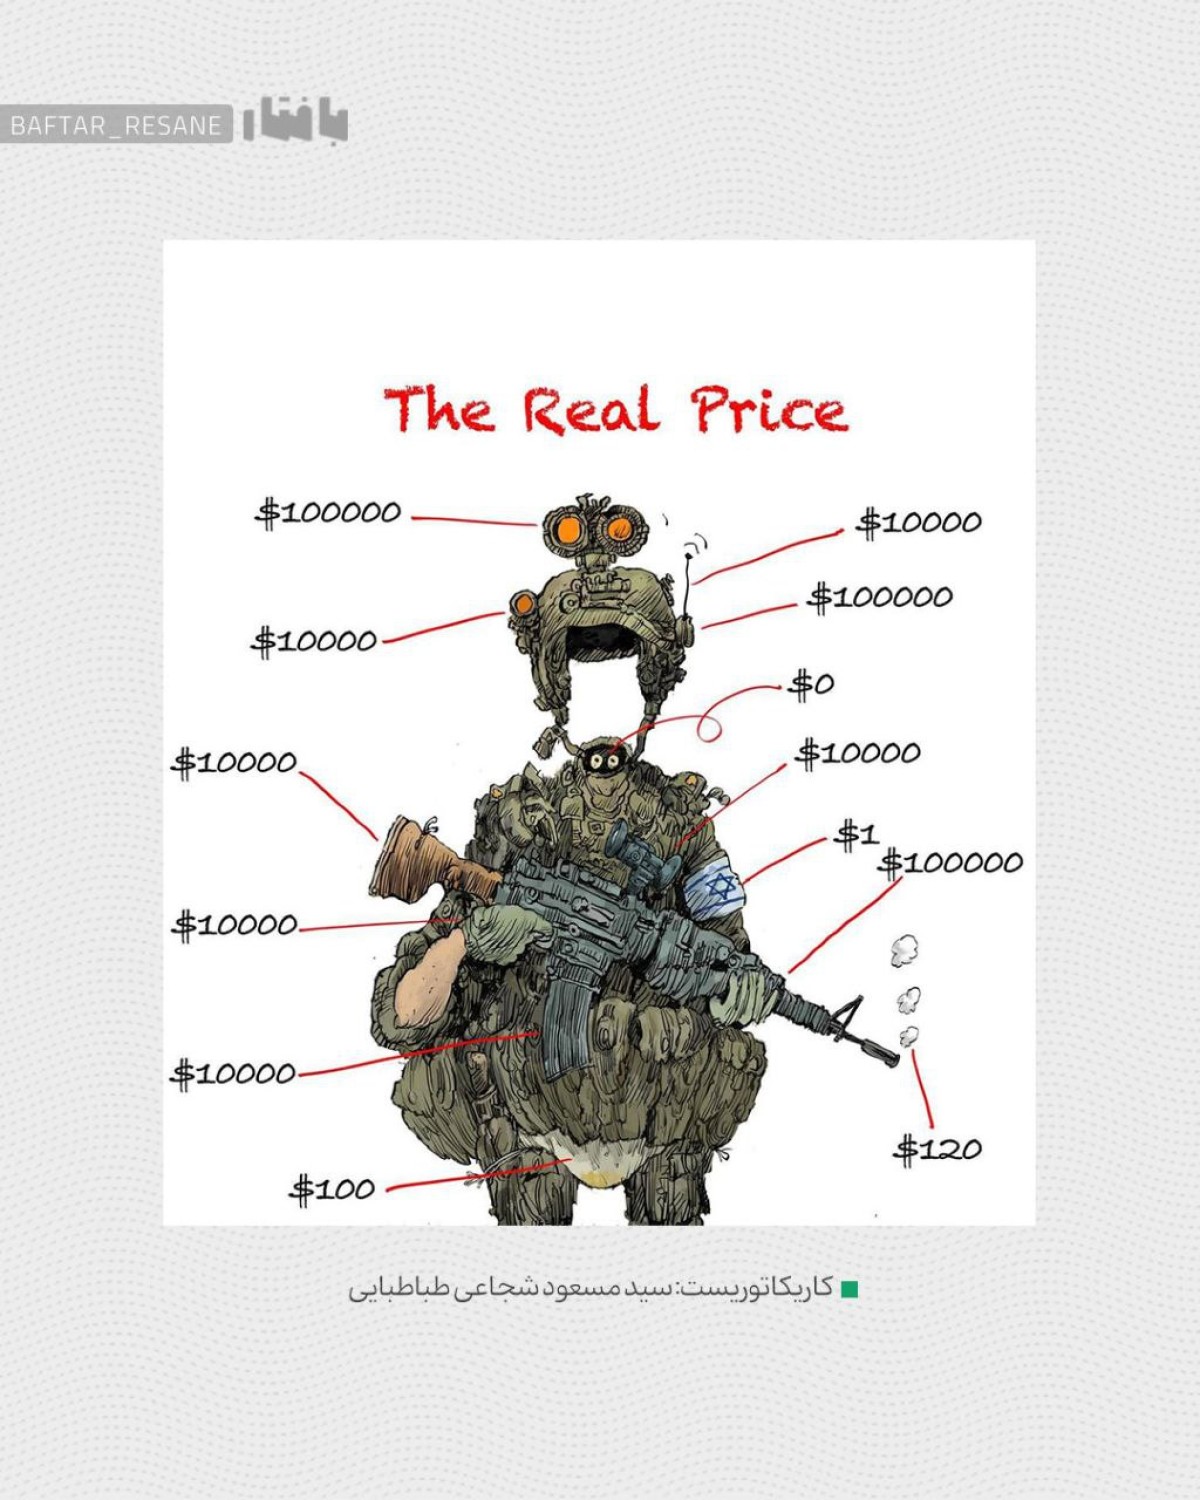 The Real Price